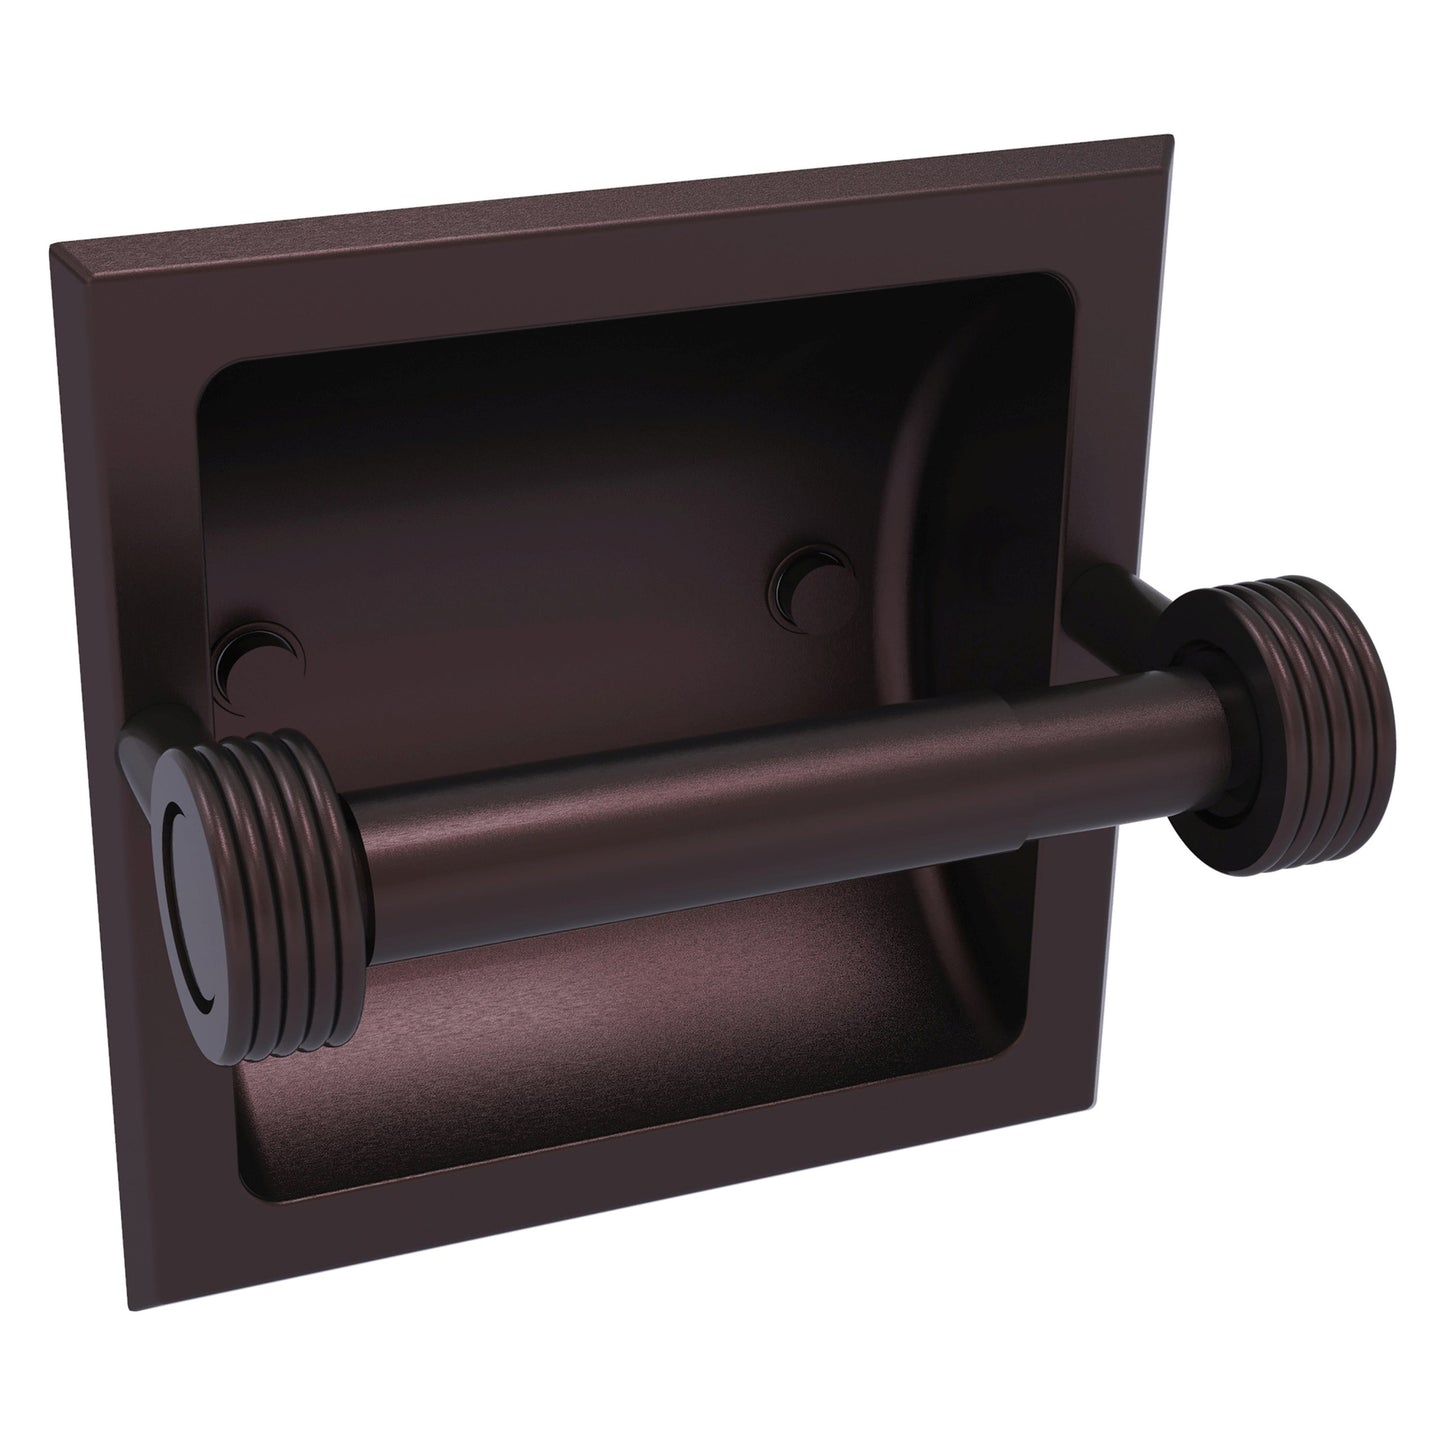 Allied Brass Skyline 2024-CG 6.3" x 6.1" Antique Bronze Solid Brass Recessed Toilet Tissue Holder With Grooved Accents